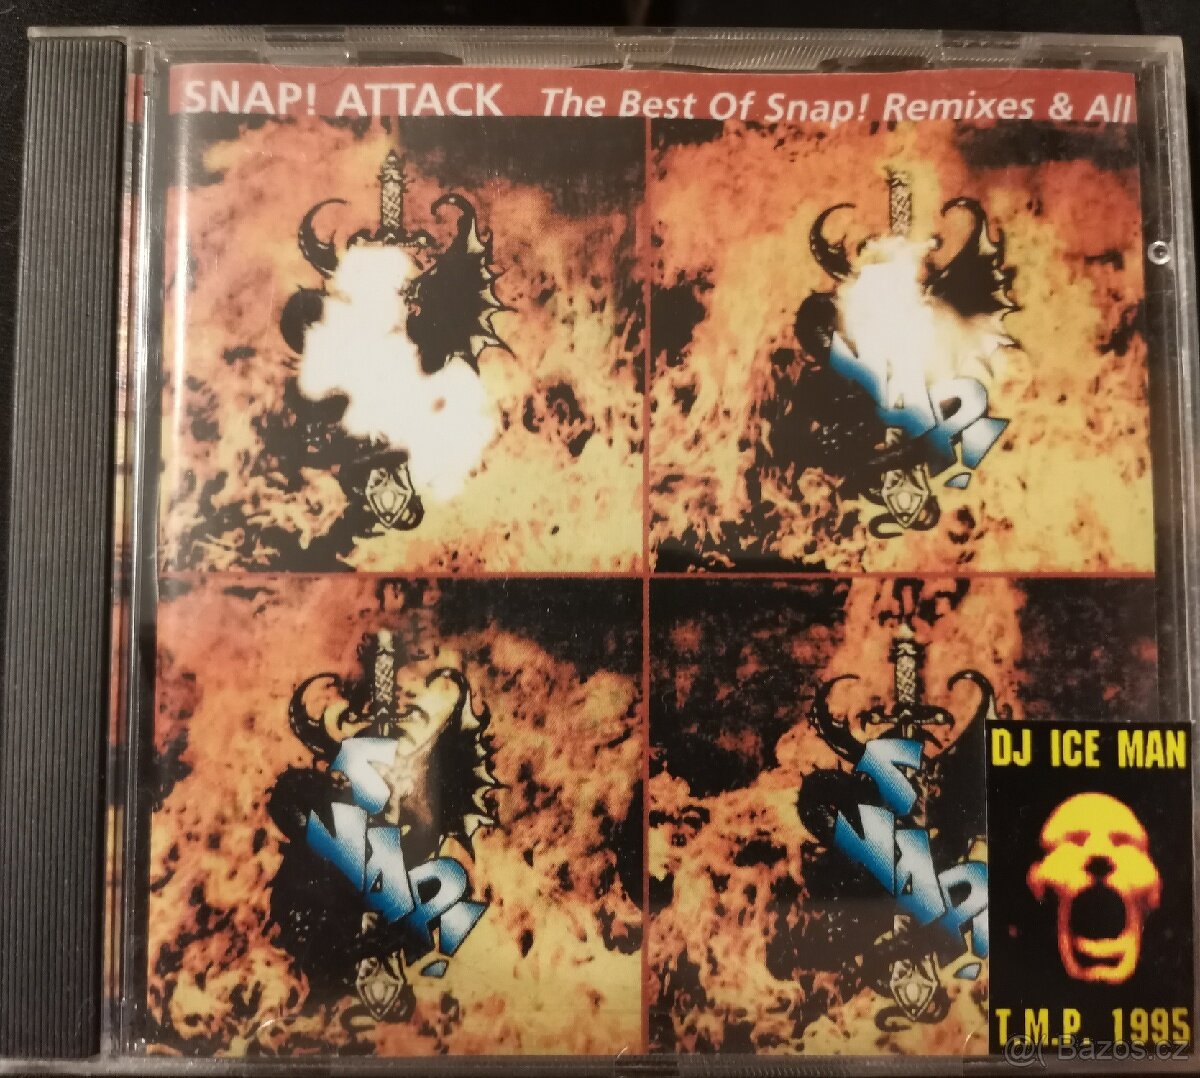 CD SNAP ATTACK - The Best Of Snap Remixes & All